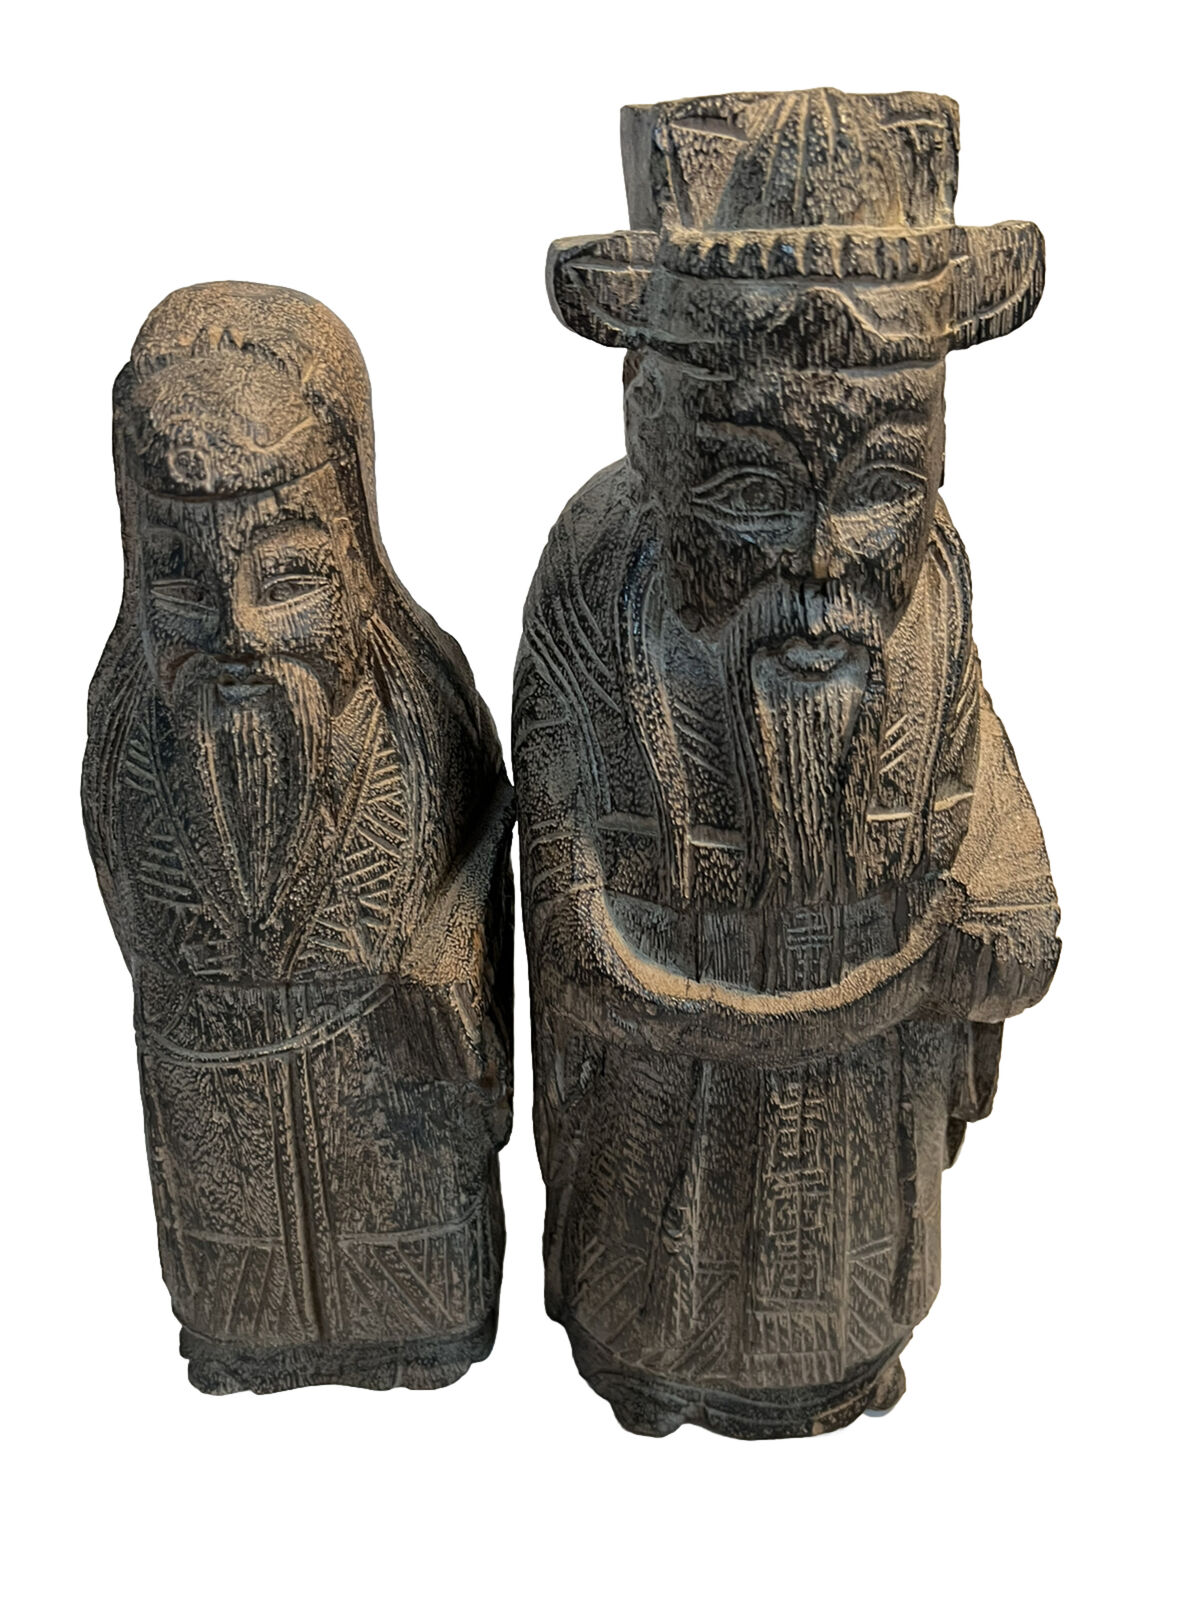 Two Chinese Japanese Asian Friars Resin Statues Made To Look Like Carved Wood